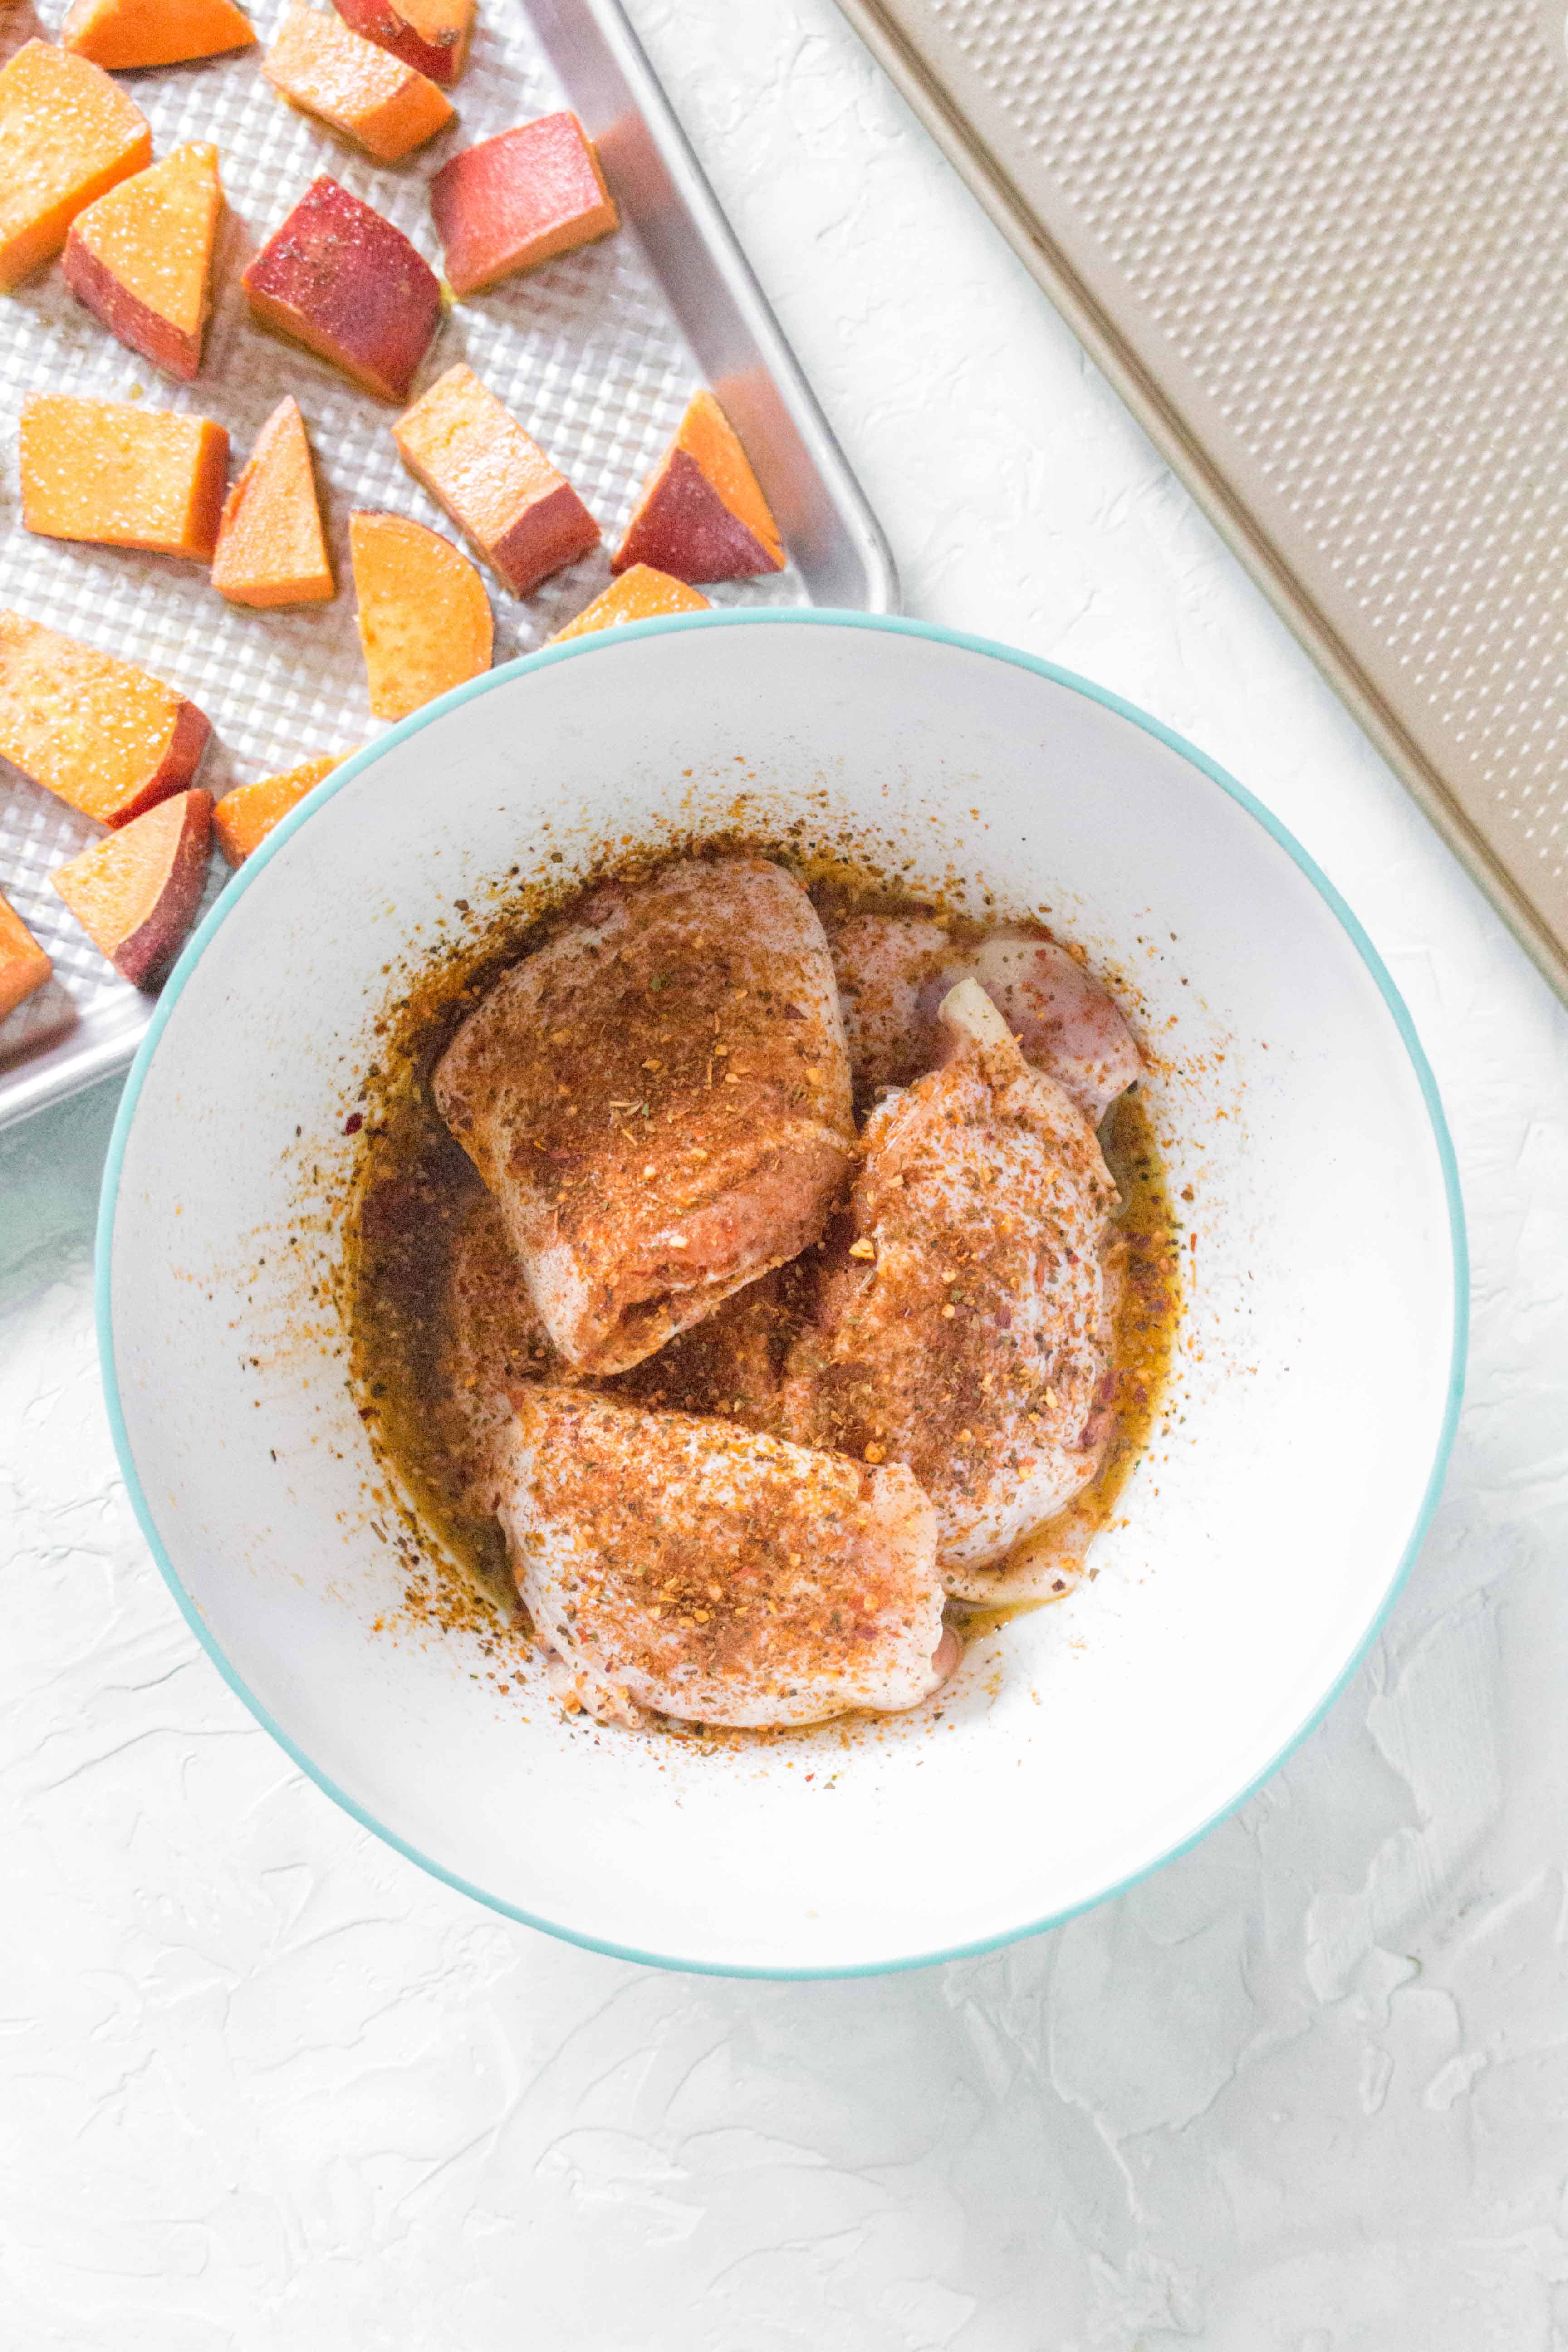 Full of flavour, crispy skin, and tender meat, this Cajun Chicken Thighs Meal Prep is going to make lunches way more fun!